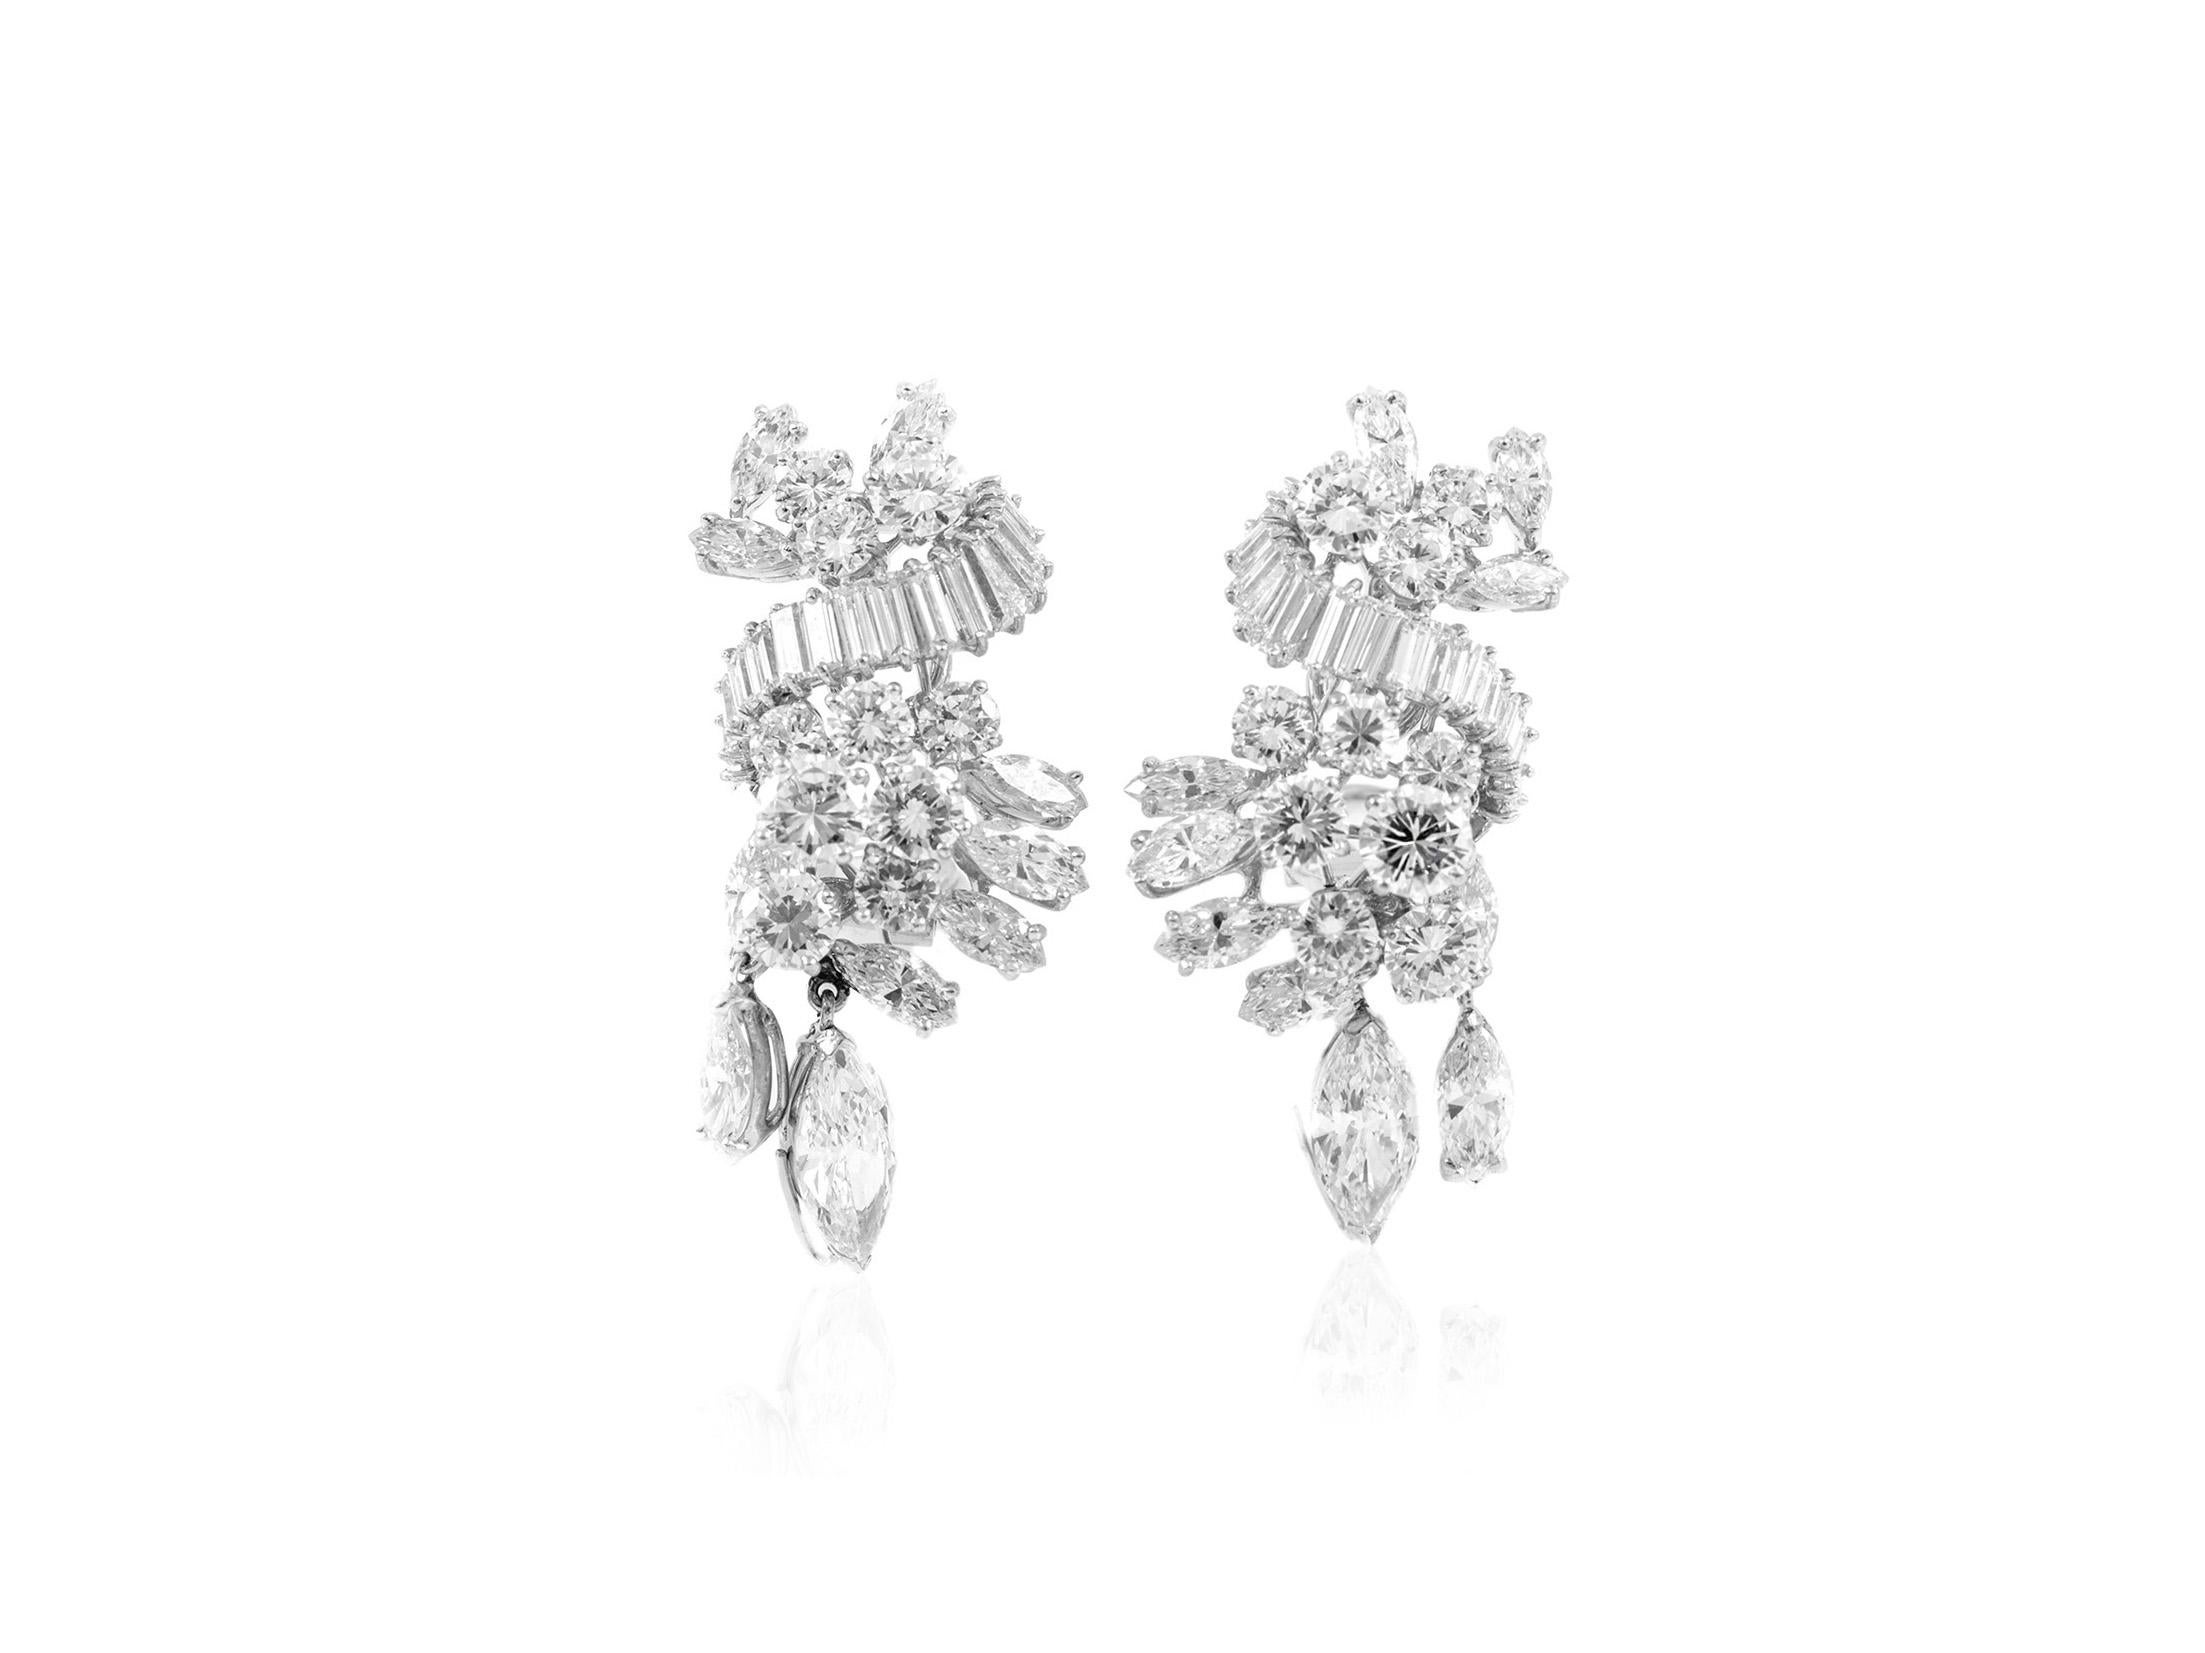 The earrings are finely crafted in platinum with 1.34 carat Gia marquise . Color F Clarity VVS1.
With 1.39 Gia Marquise . Color D Clarity  VS1  and all around eighing approximately total of 15.00 carta.